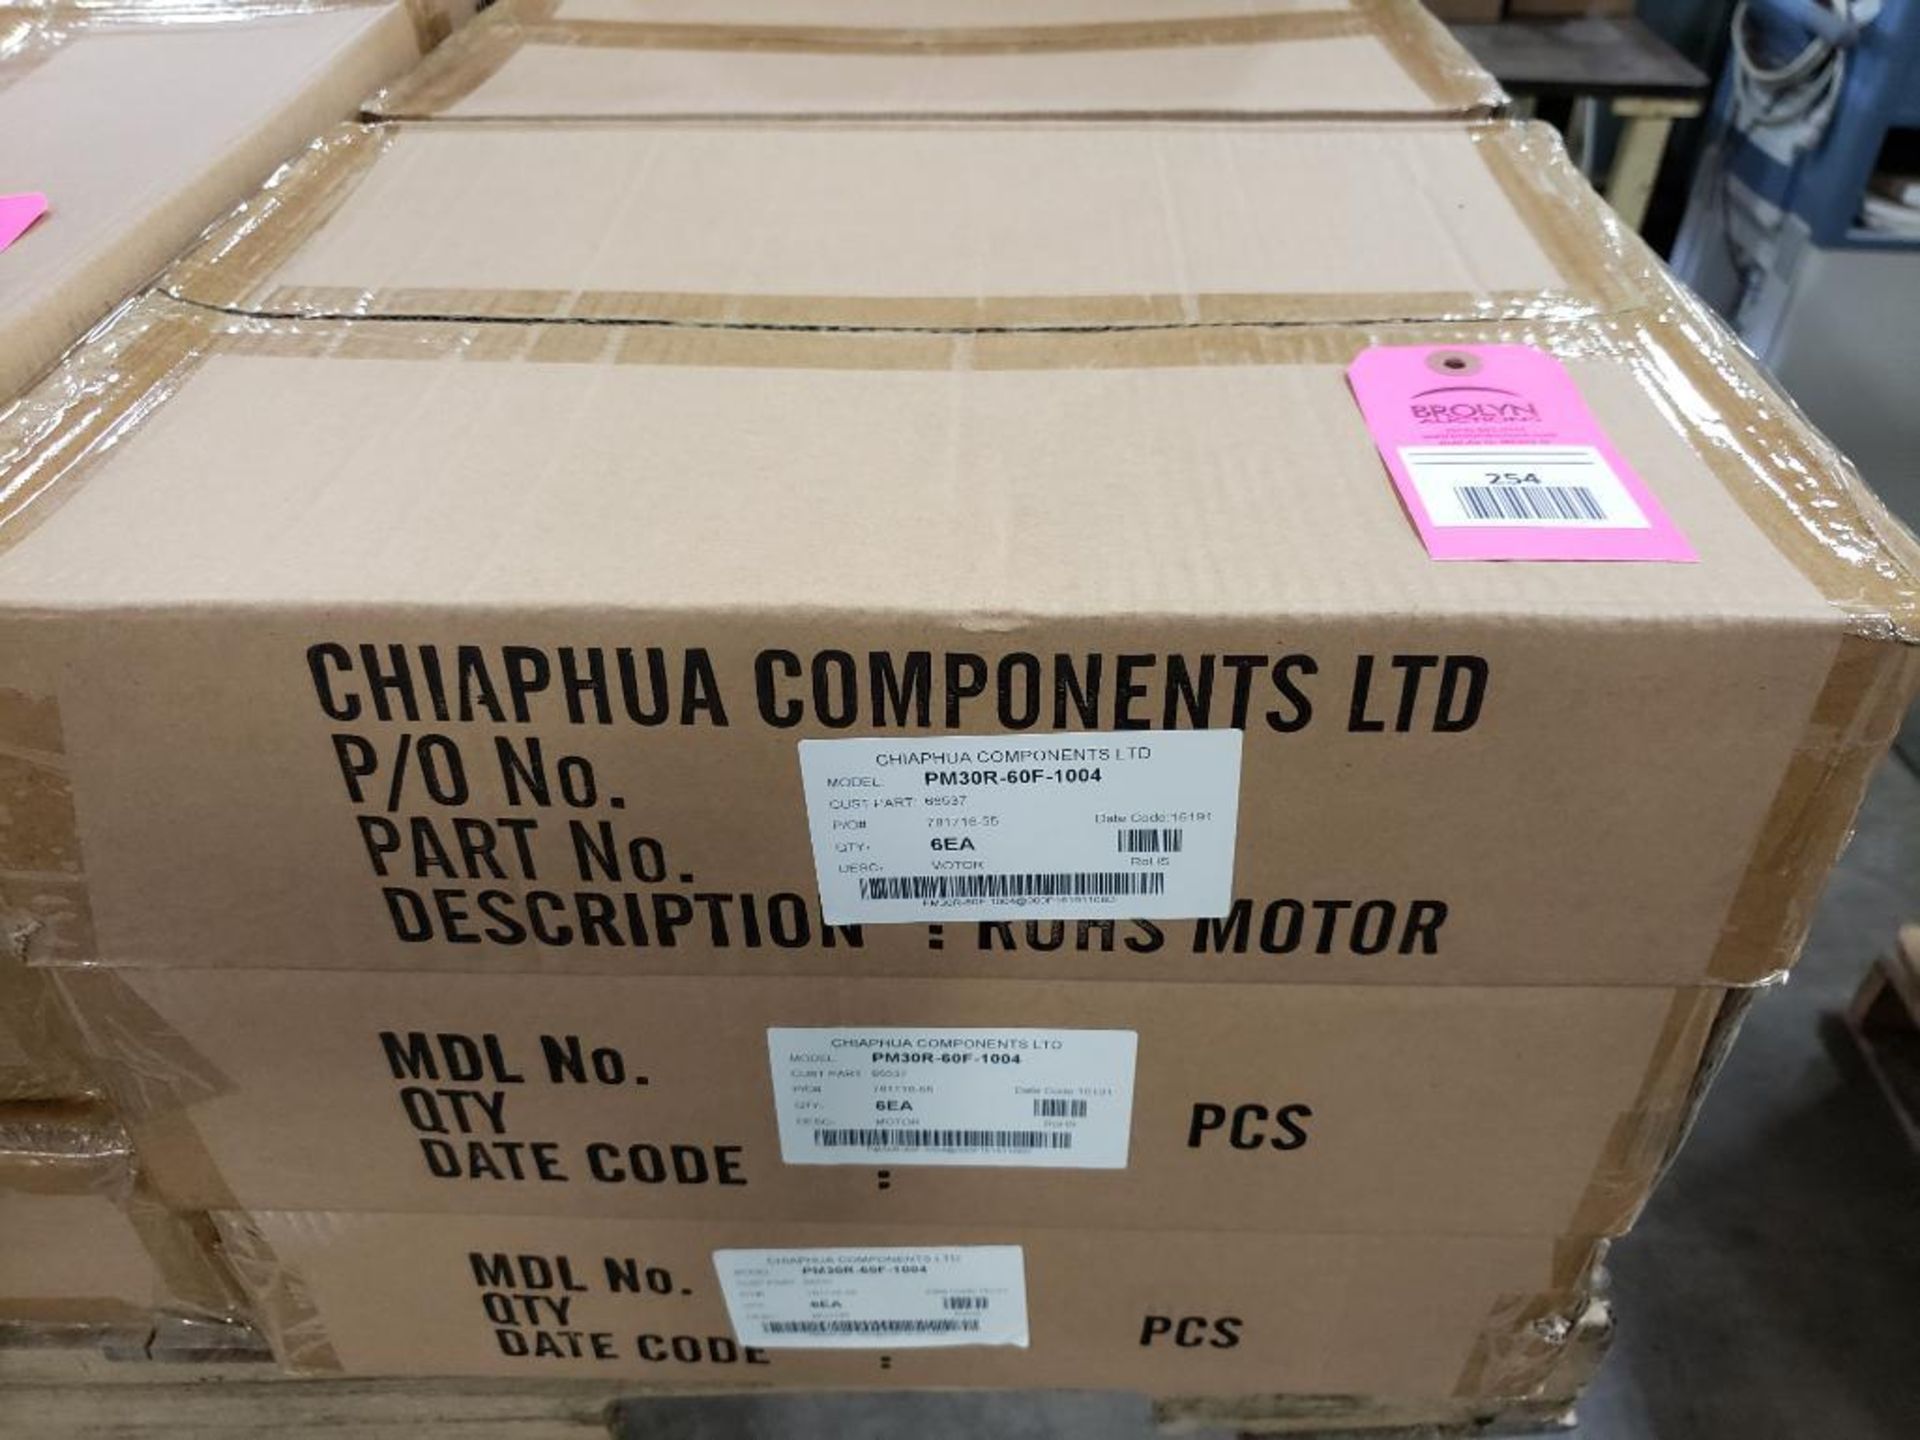 Qty 18 - Chiaphua components PM30R-60F-1004. Atwood Mobile 66537 12VDC Motors. New in box.